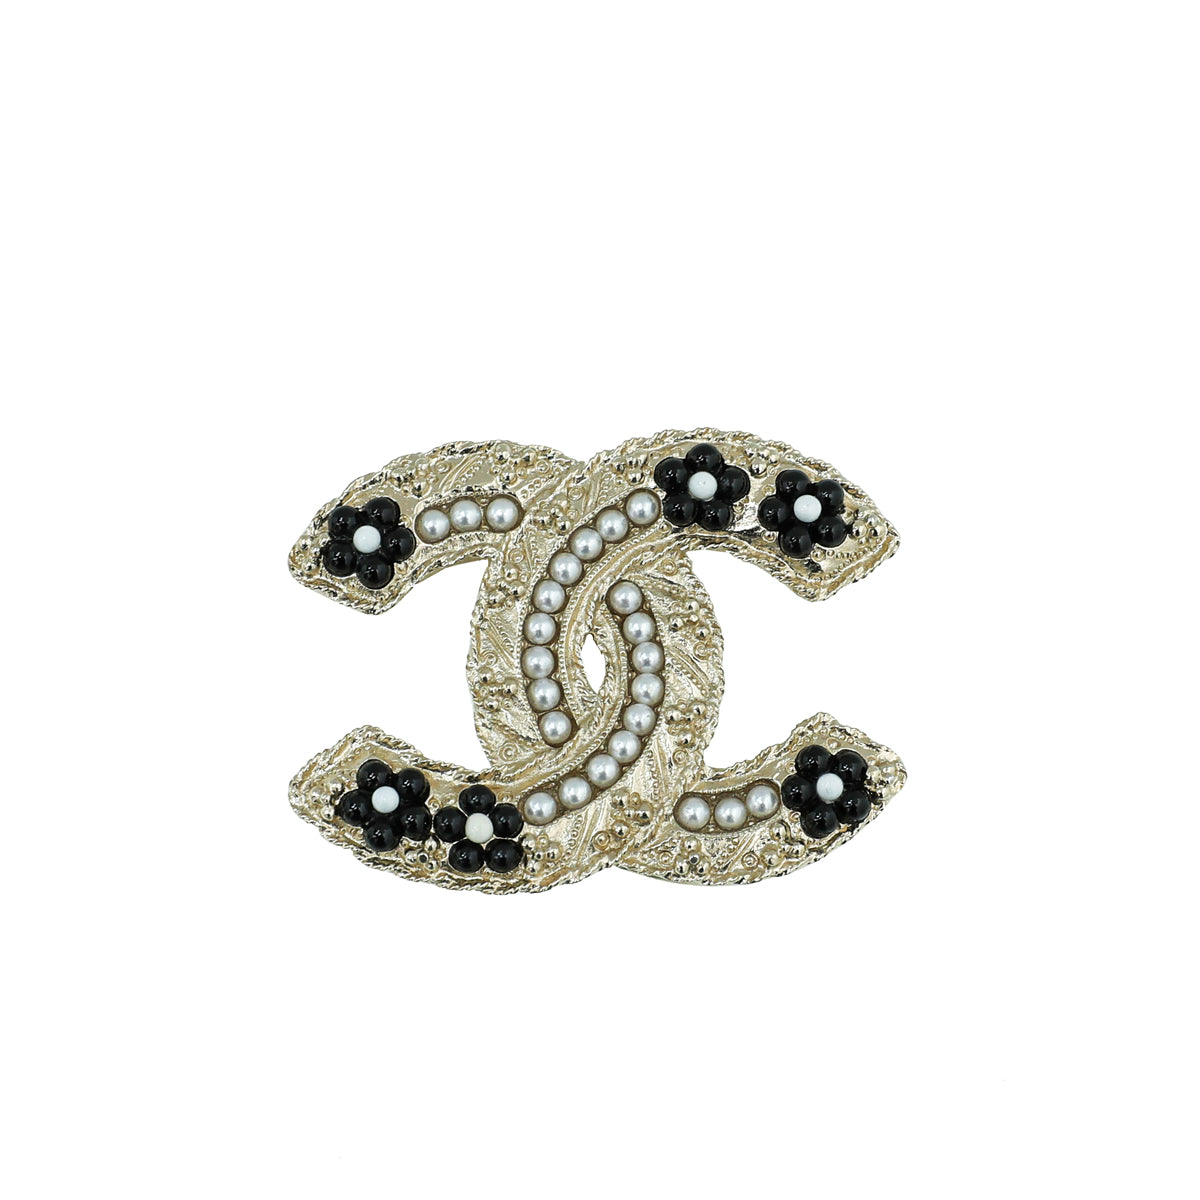 Chanel Light Gold Floral Beaded Faux Pearl CC Brooch